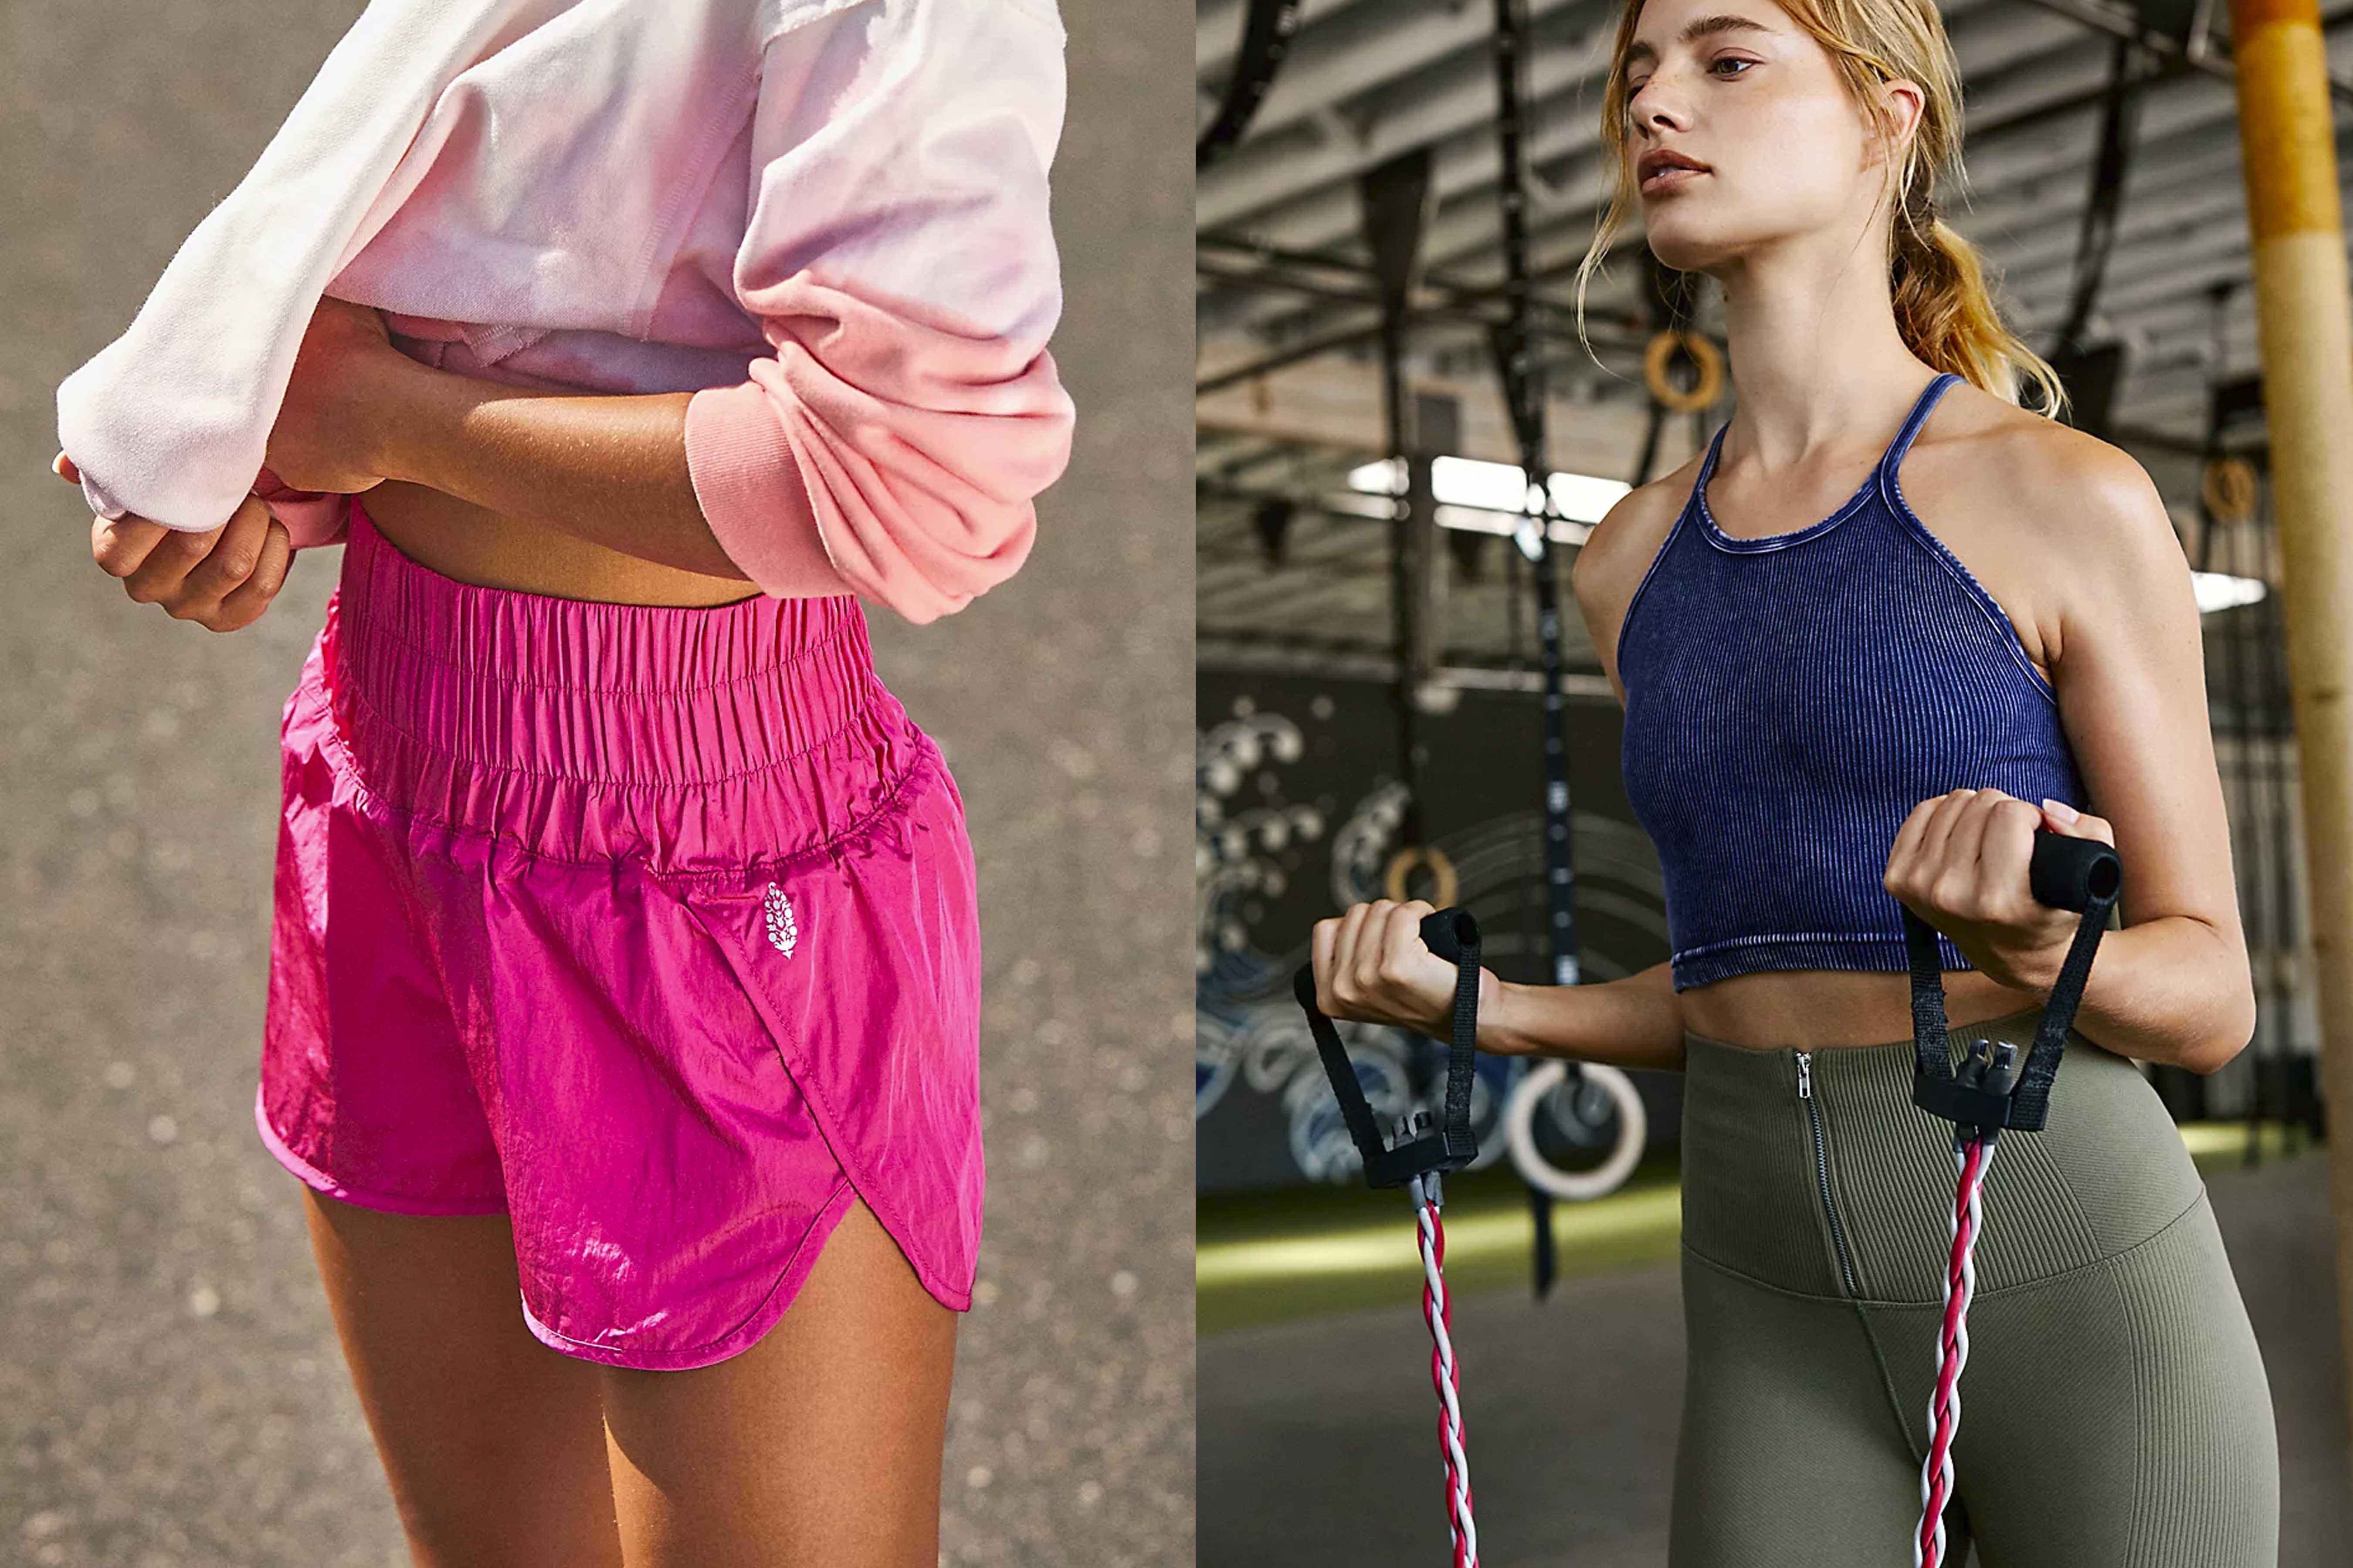 FP Movement by Free People activewear brand